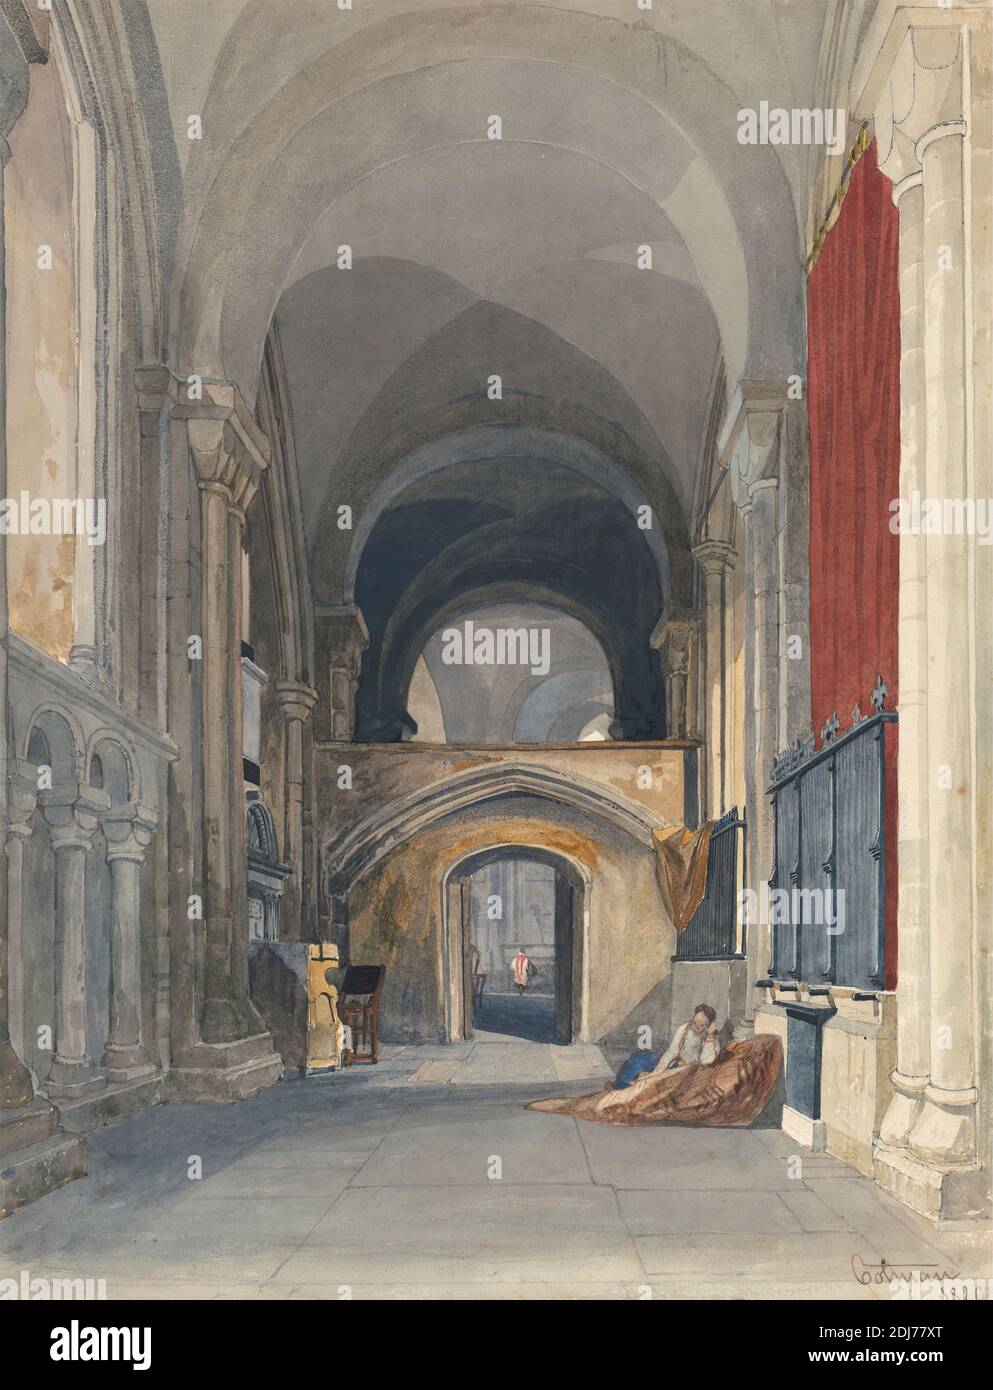 Norwich Cathedral: Interior of the North Aisle of the Choir, Looking East, John Sell Cotman, 1782–1842, British, Miles Edmund Cotman, 1810–1858, British, 1829, Graphite, watercolor, and gouache on medium, slightly textured, cream wove paper, Sheet: 13 3/4 × 10 1/2 inches (34.9 × 26.7 cm), arches, architectural subject, cathedral, choir, interior, England, Norwich, United Kingdom Stock Photo